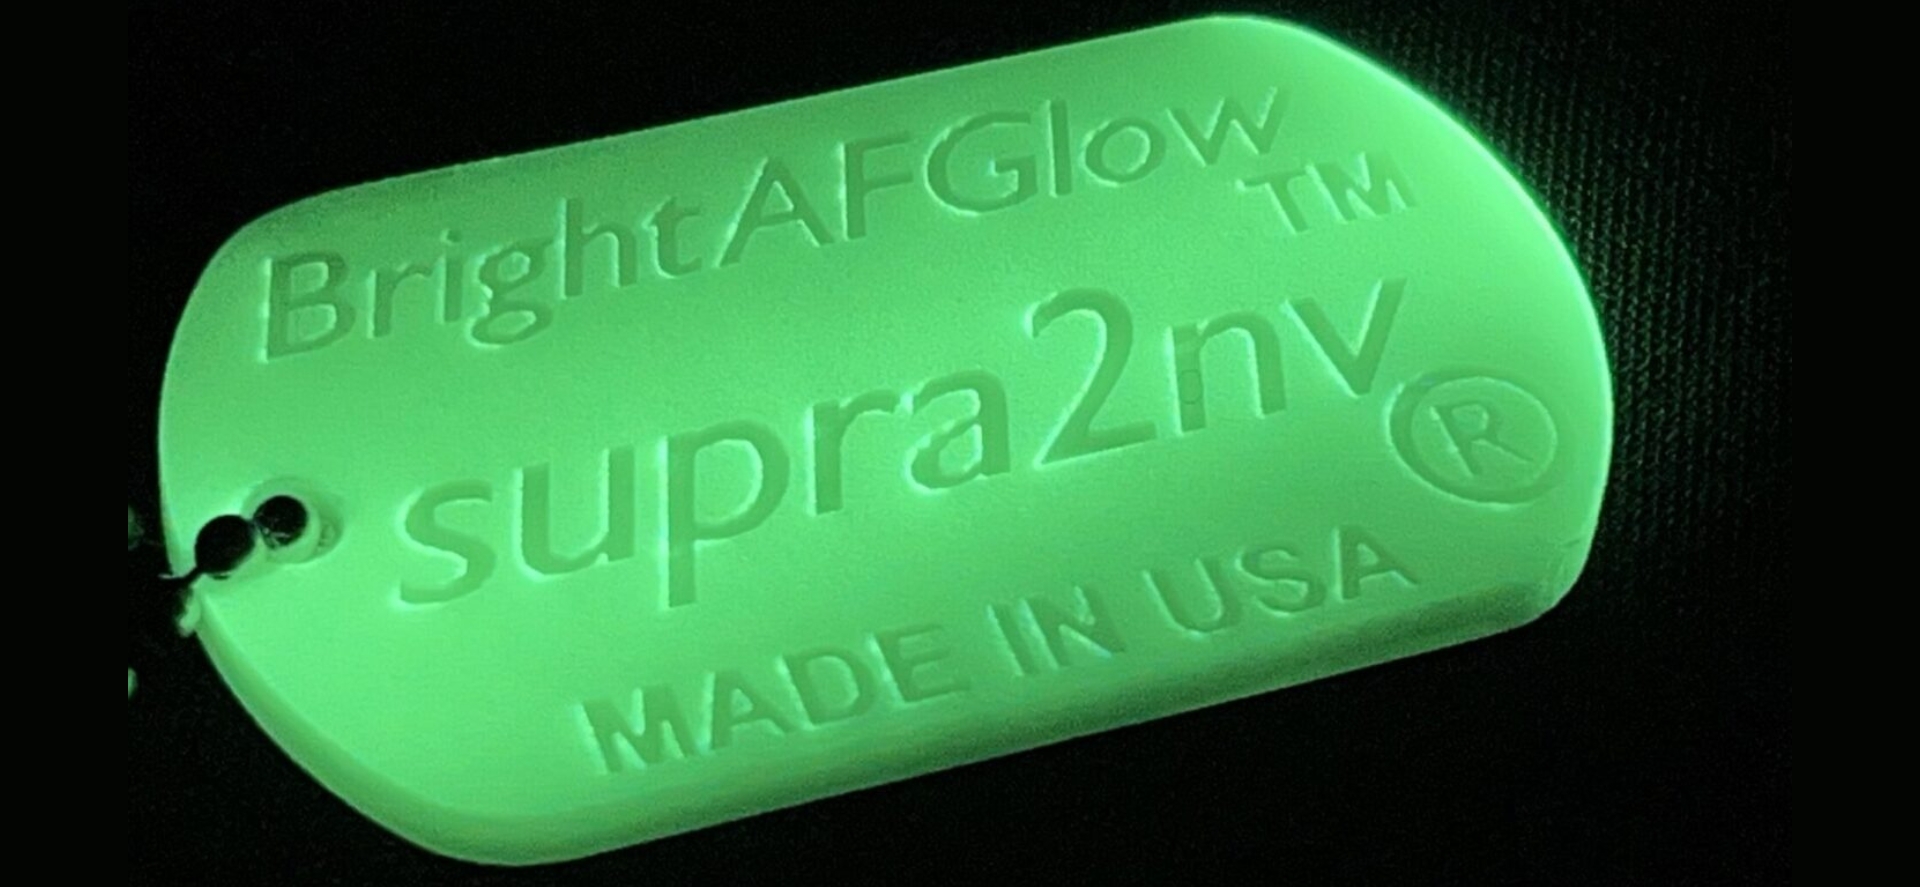 A close up of the glow in the dark text